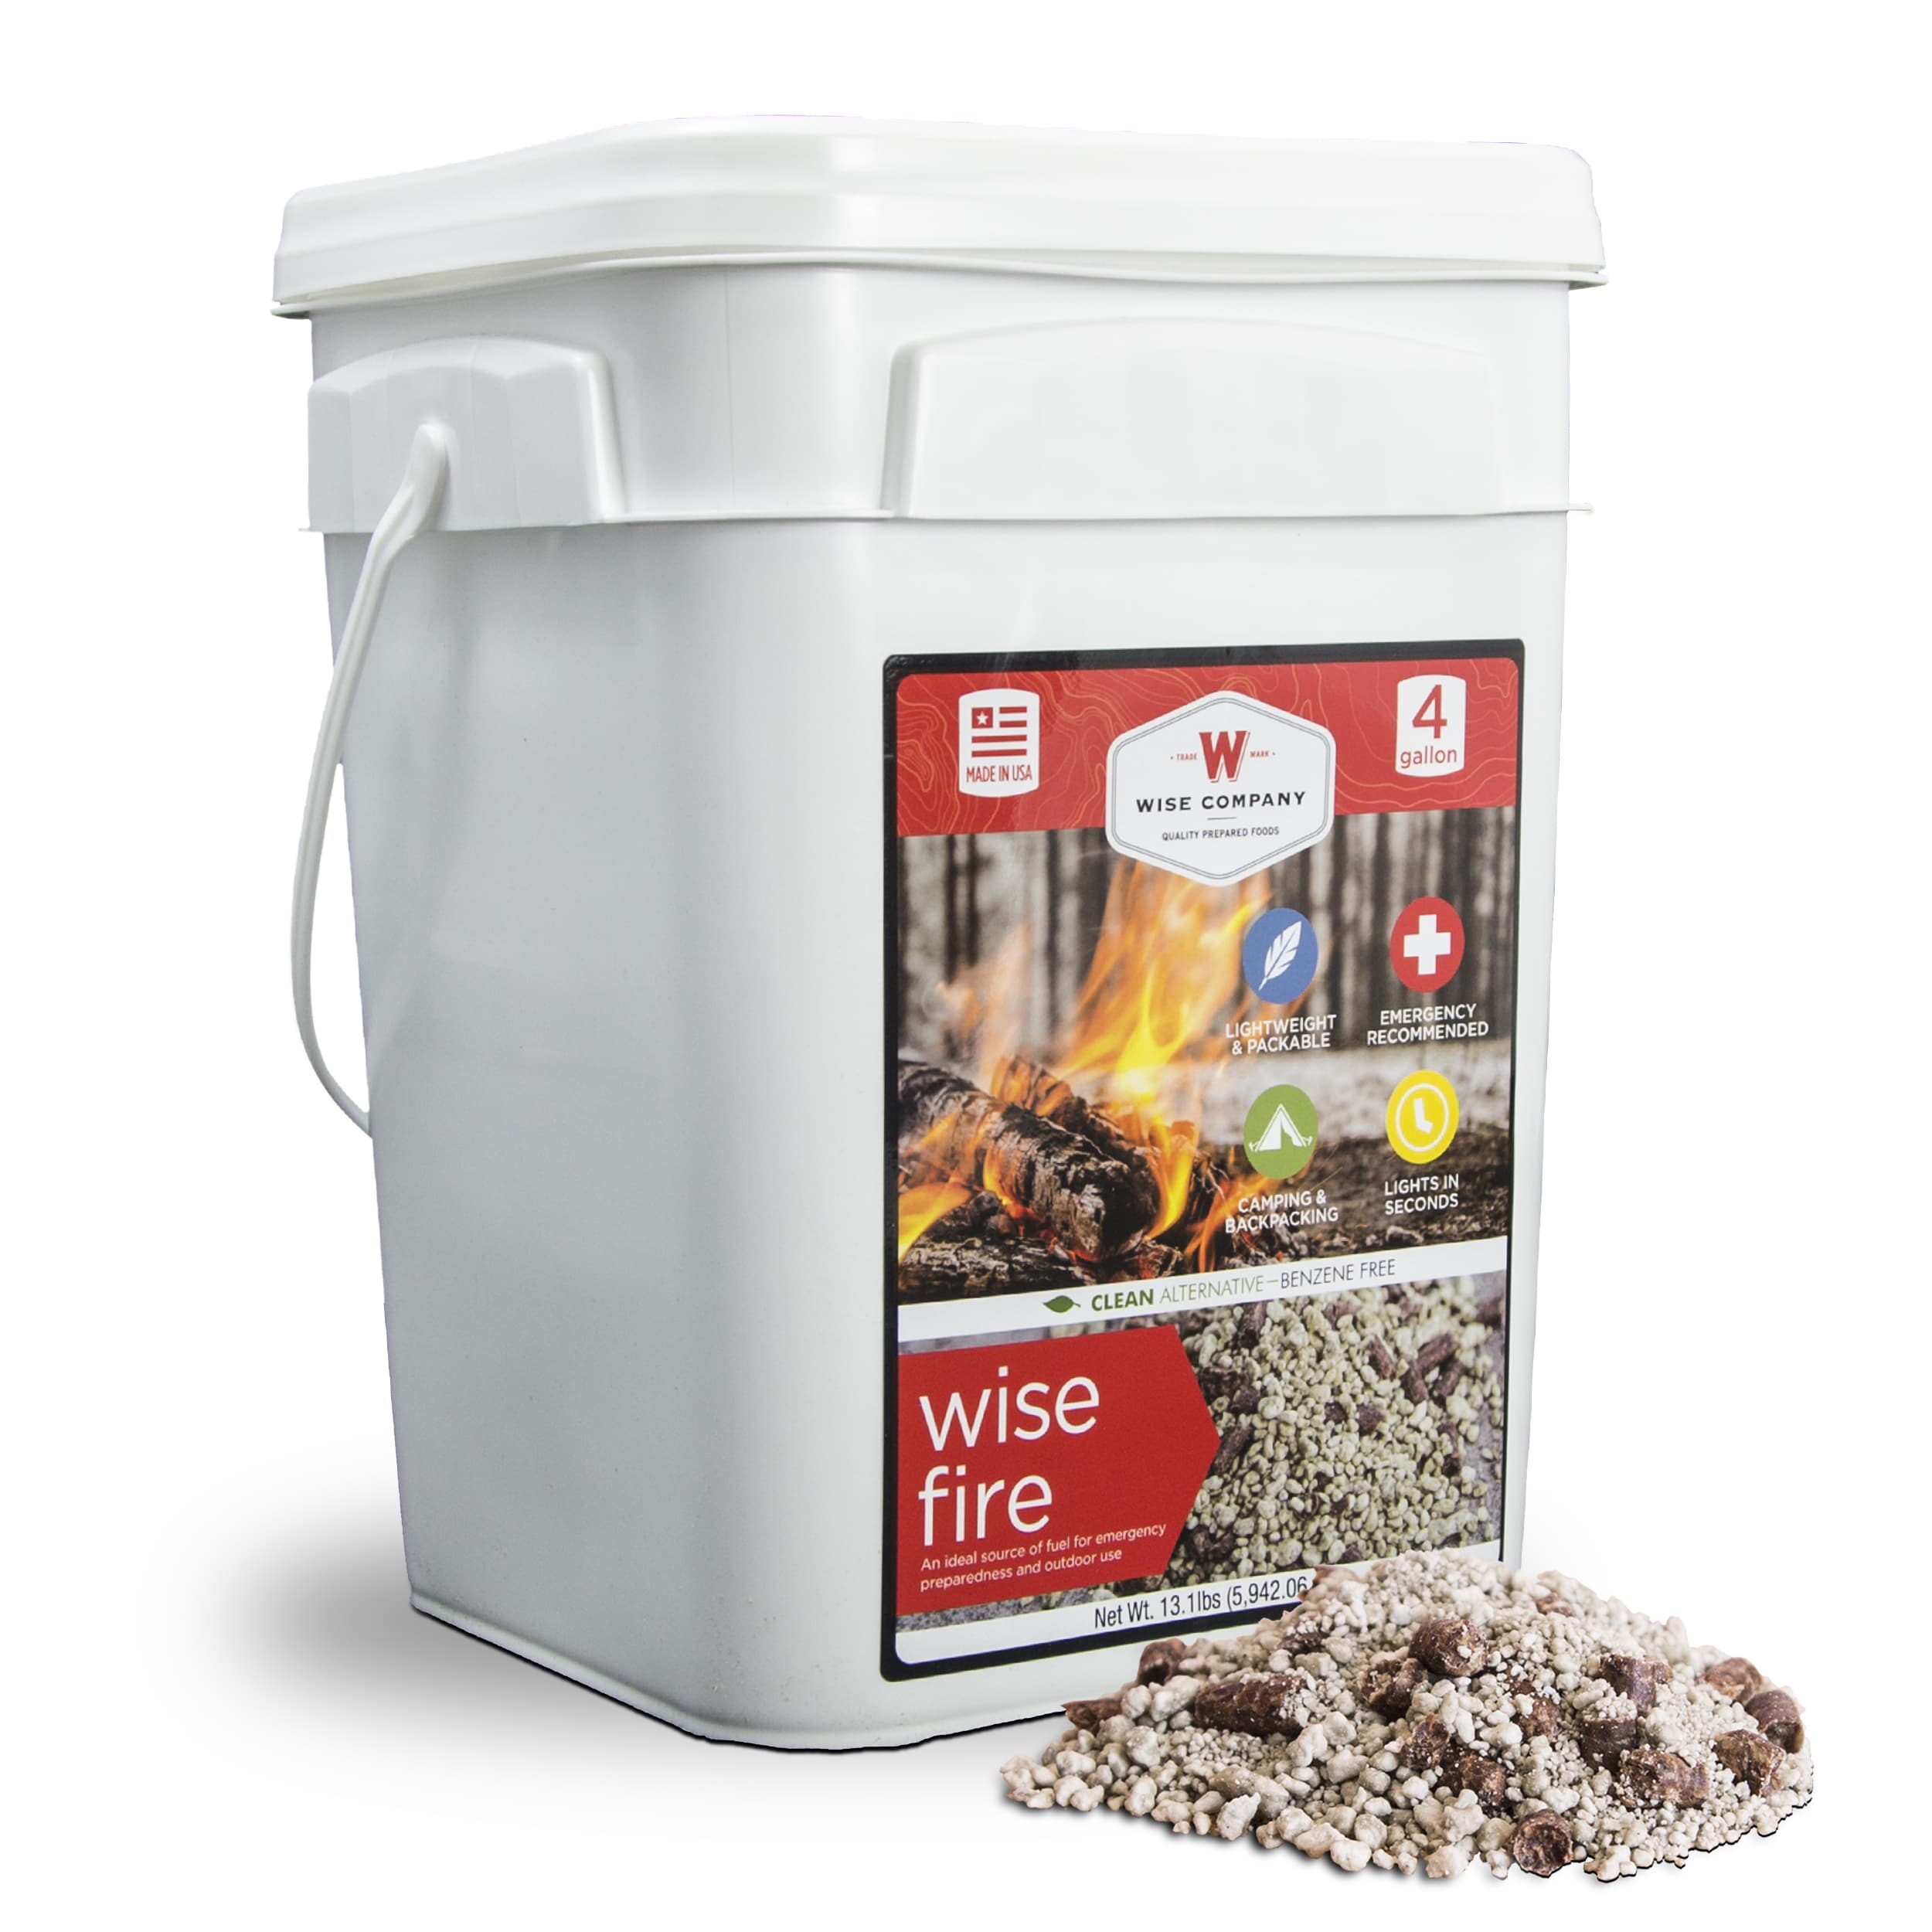 Wise Company WiseFire Starter (4 Gallons)